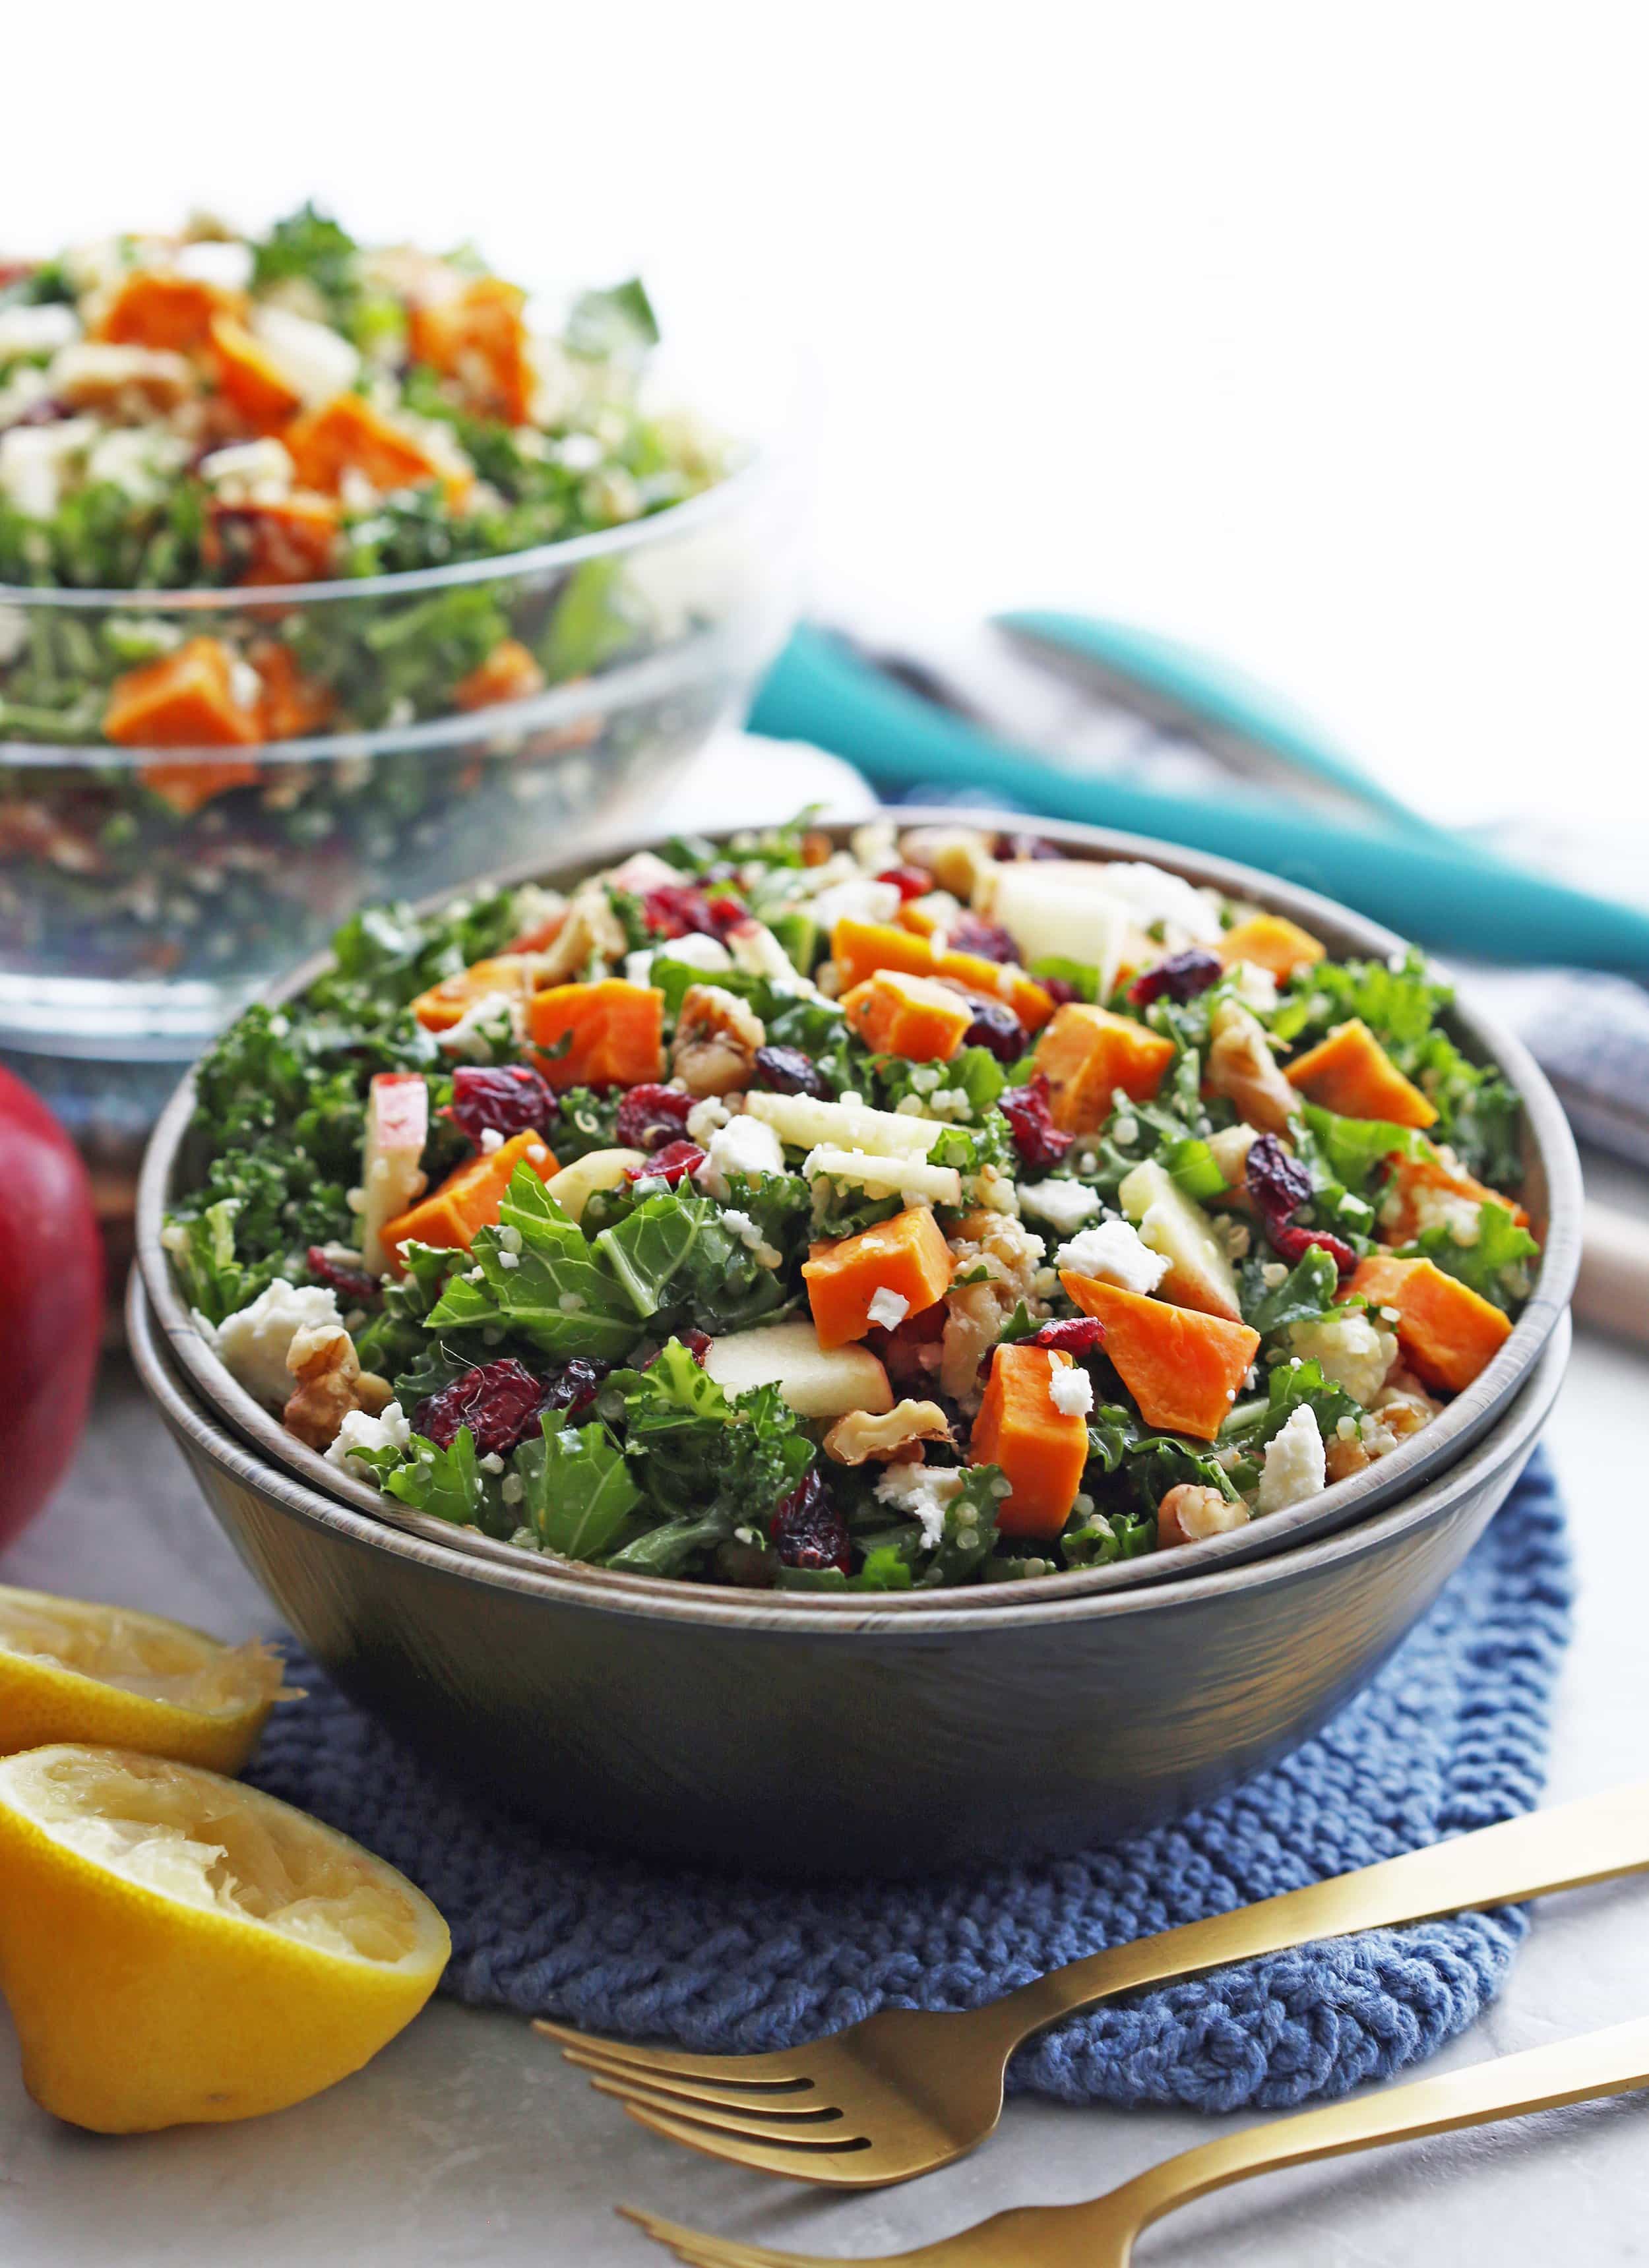 A bowl full of sweet potato salad with kale, walnuts, feta, quinoa, and dried cranberries.